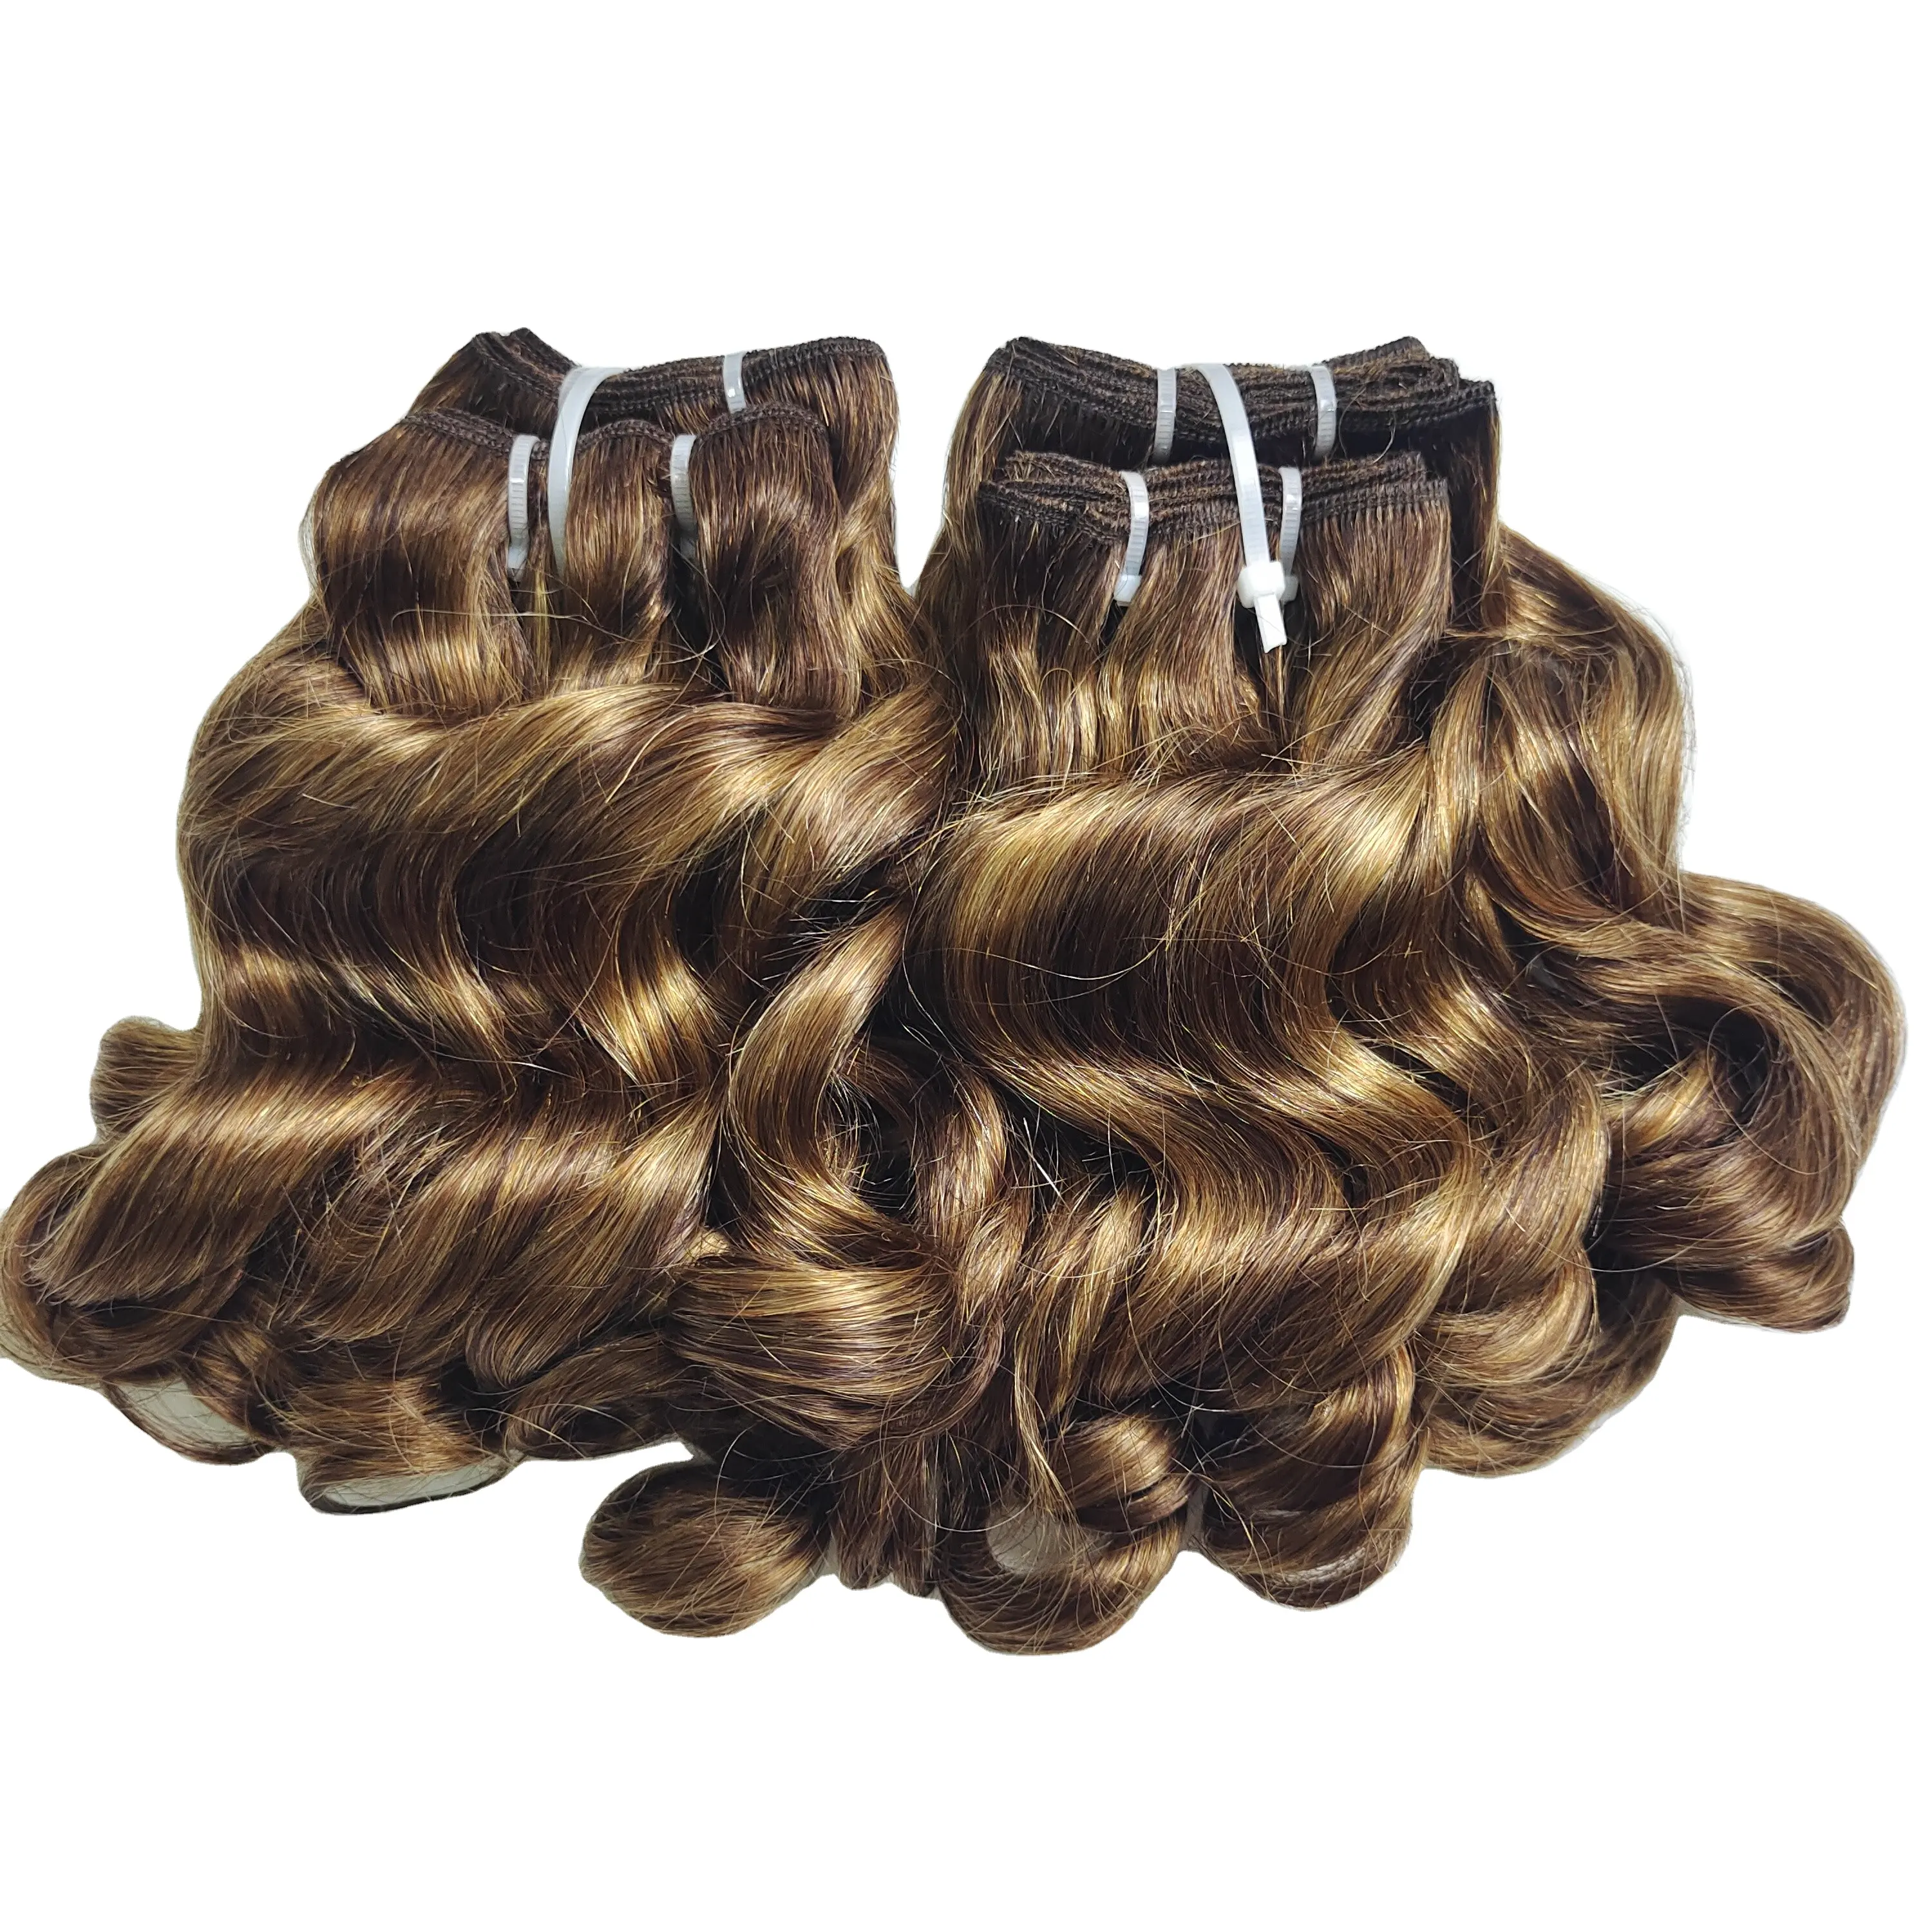 Hot style Rose curly Supplier Free Shipping Wholesales Piano Color Straight P4/27 colors Human hair weft Extensions